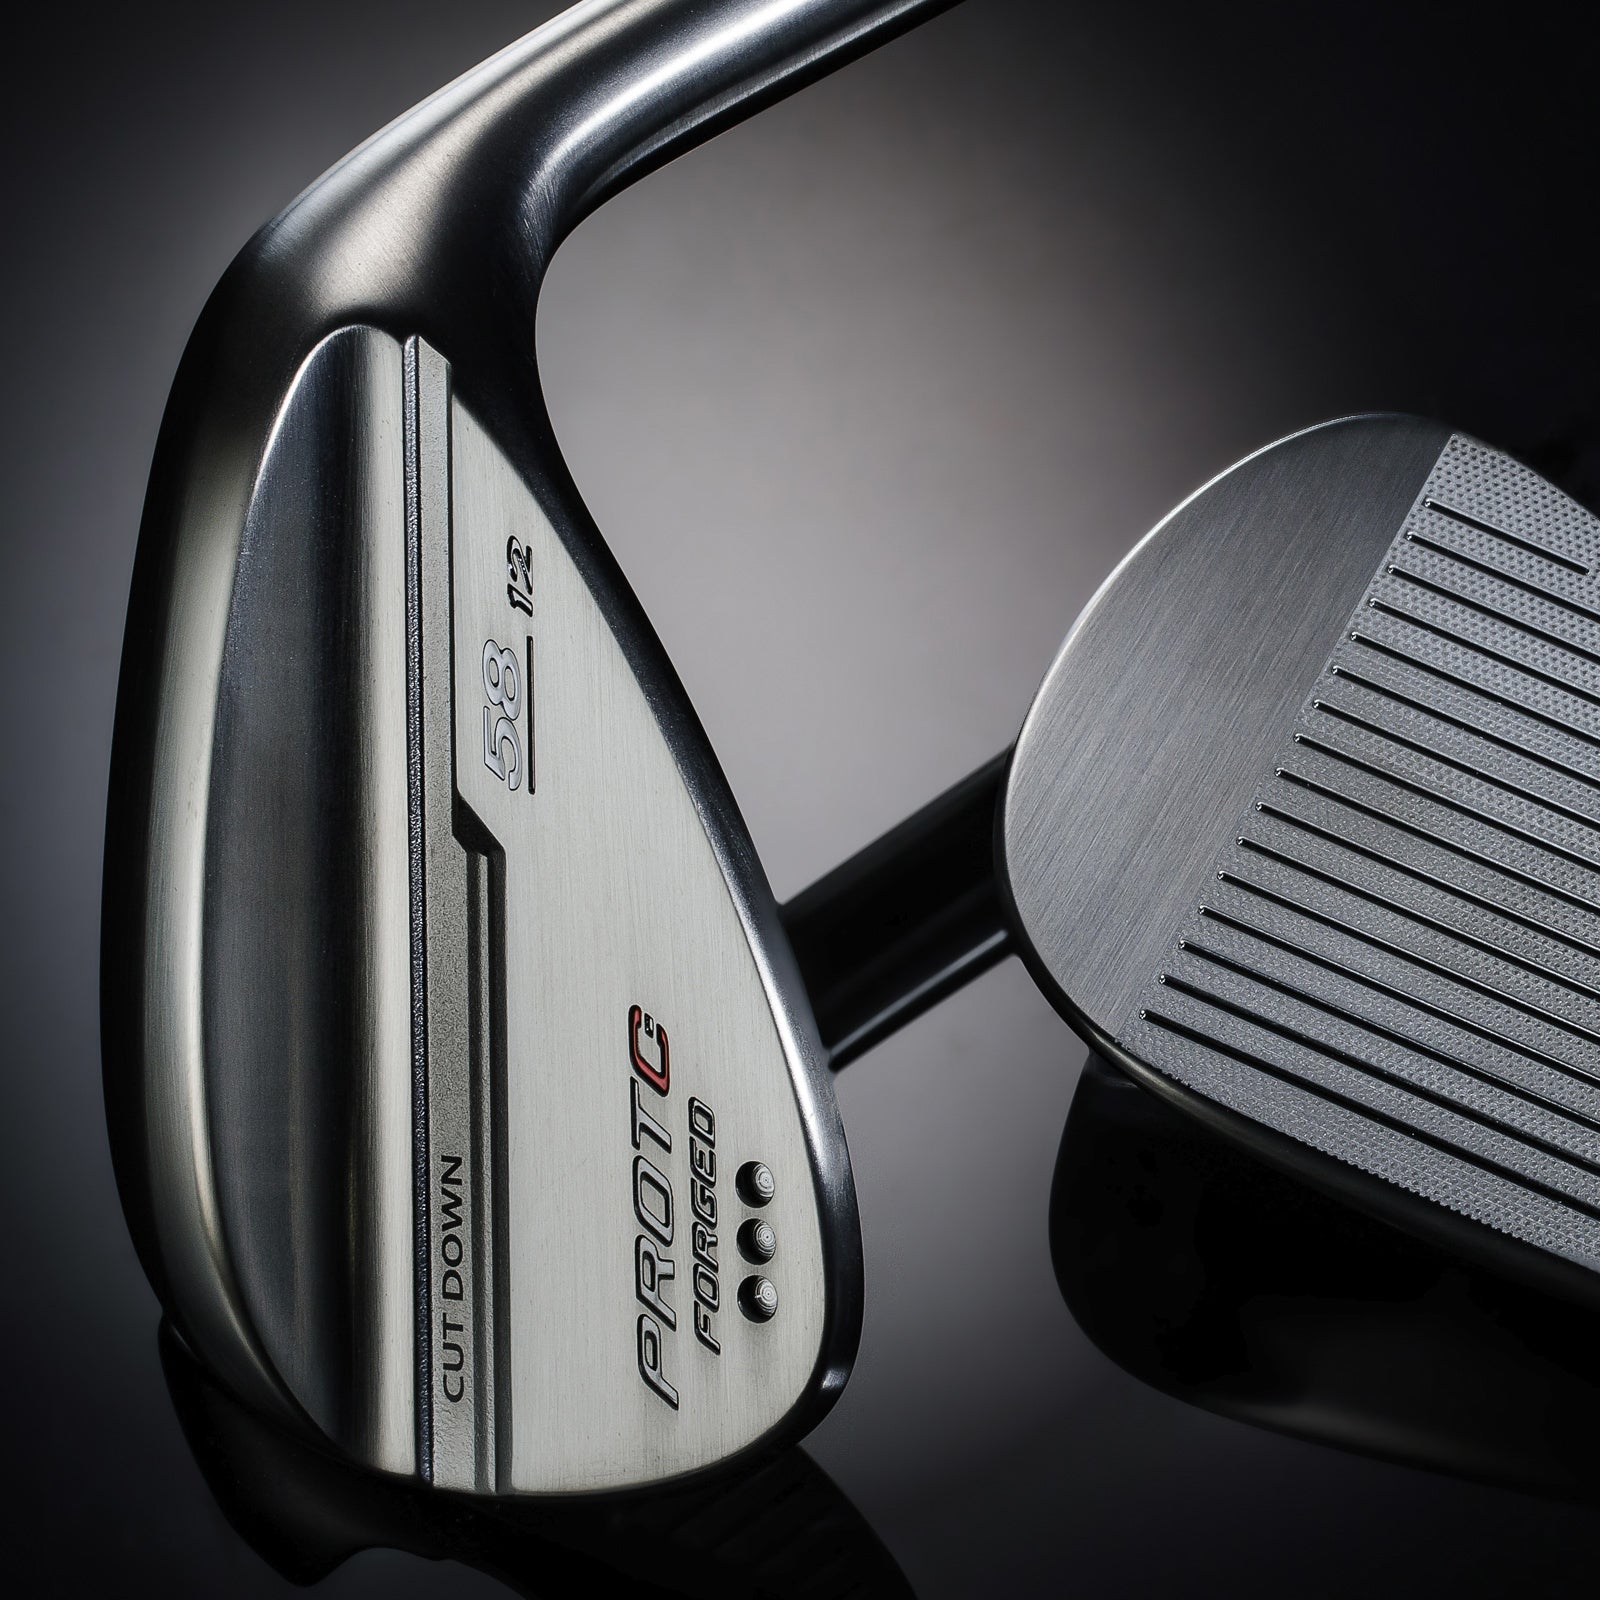 PROTOCONCEPT Golf, Protoconcept Wedge, Golf Wedge, Forged wedge